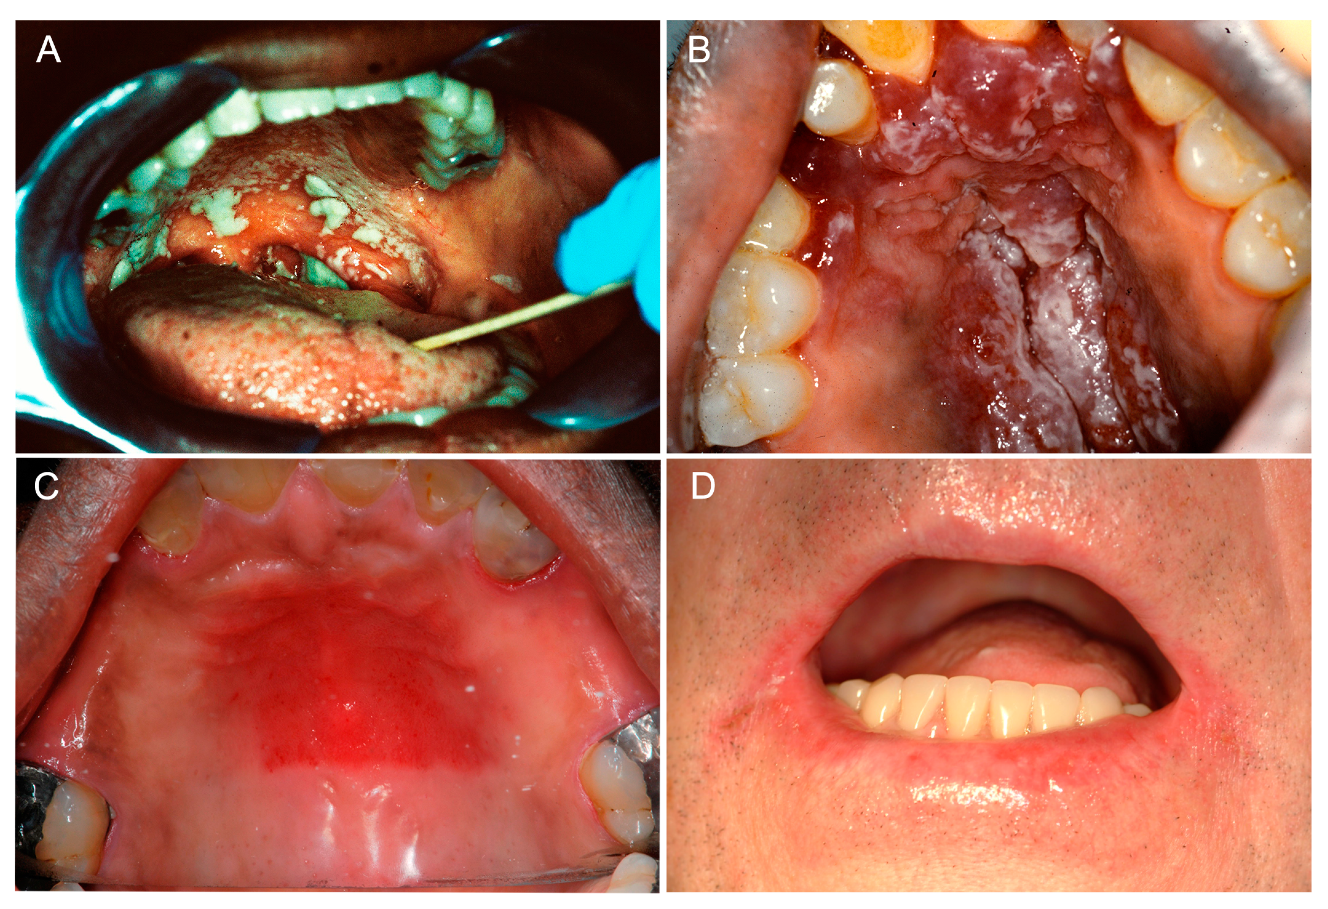 JoF | Free Full-Text | Oral Candidiasis: A Disease of Opportunity | HTML